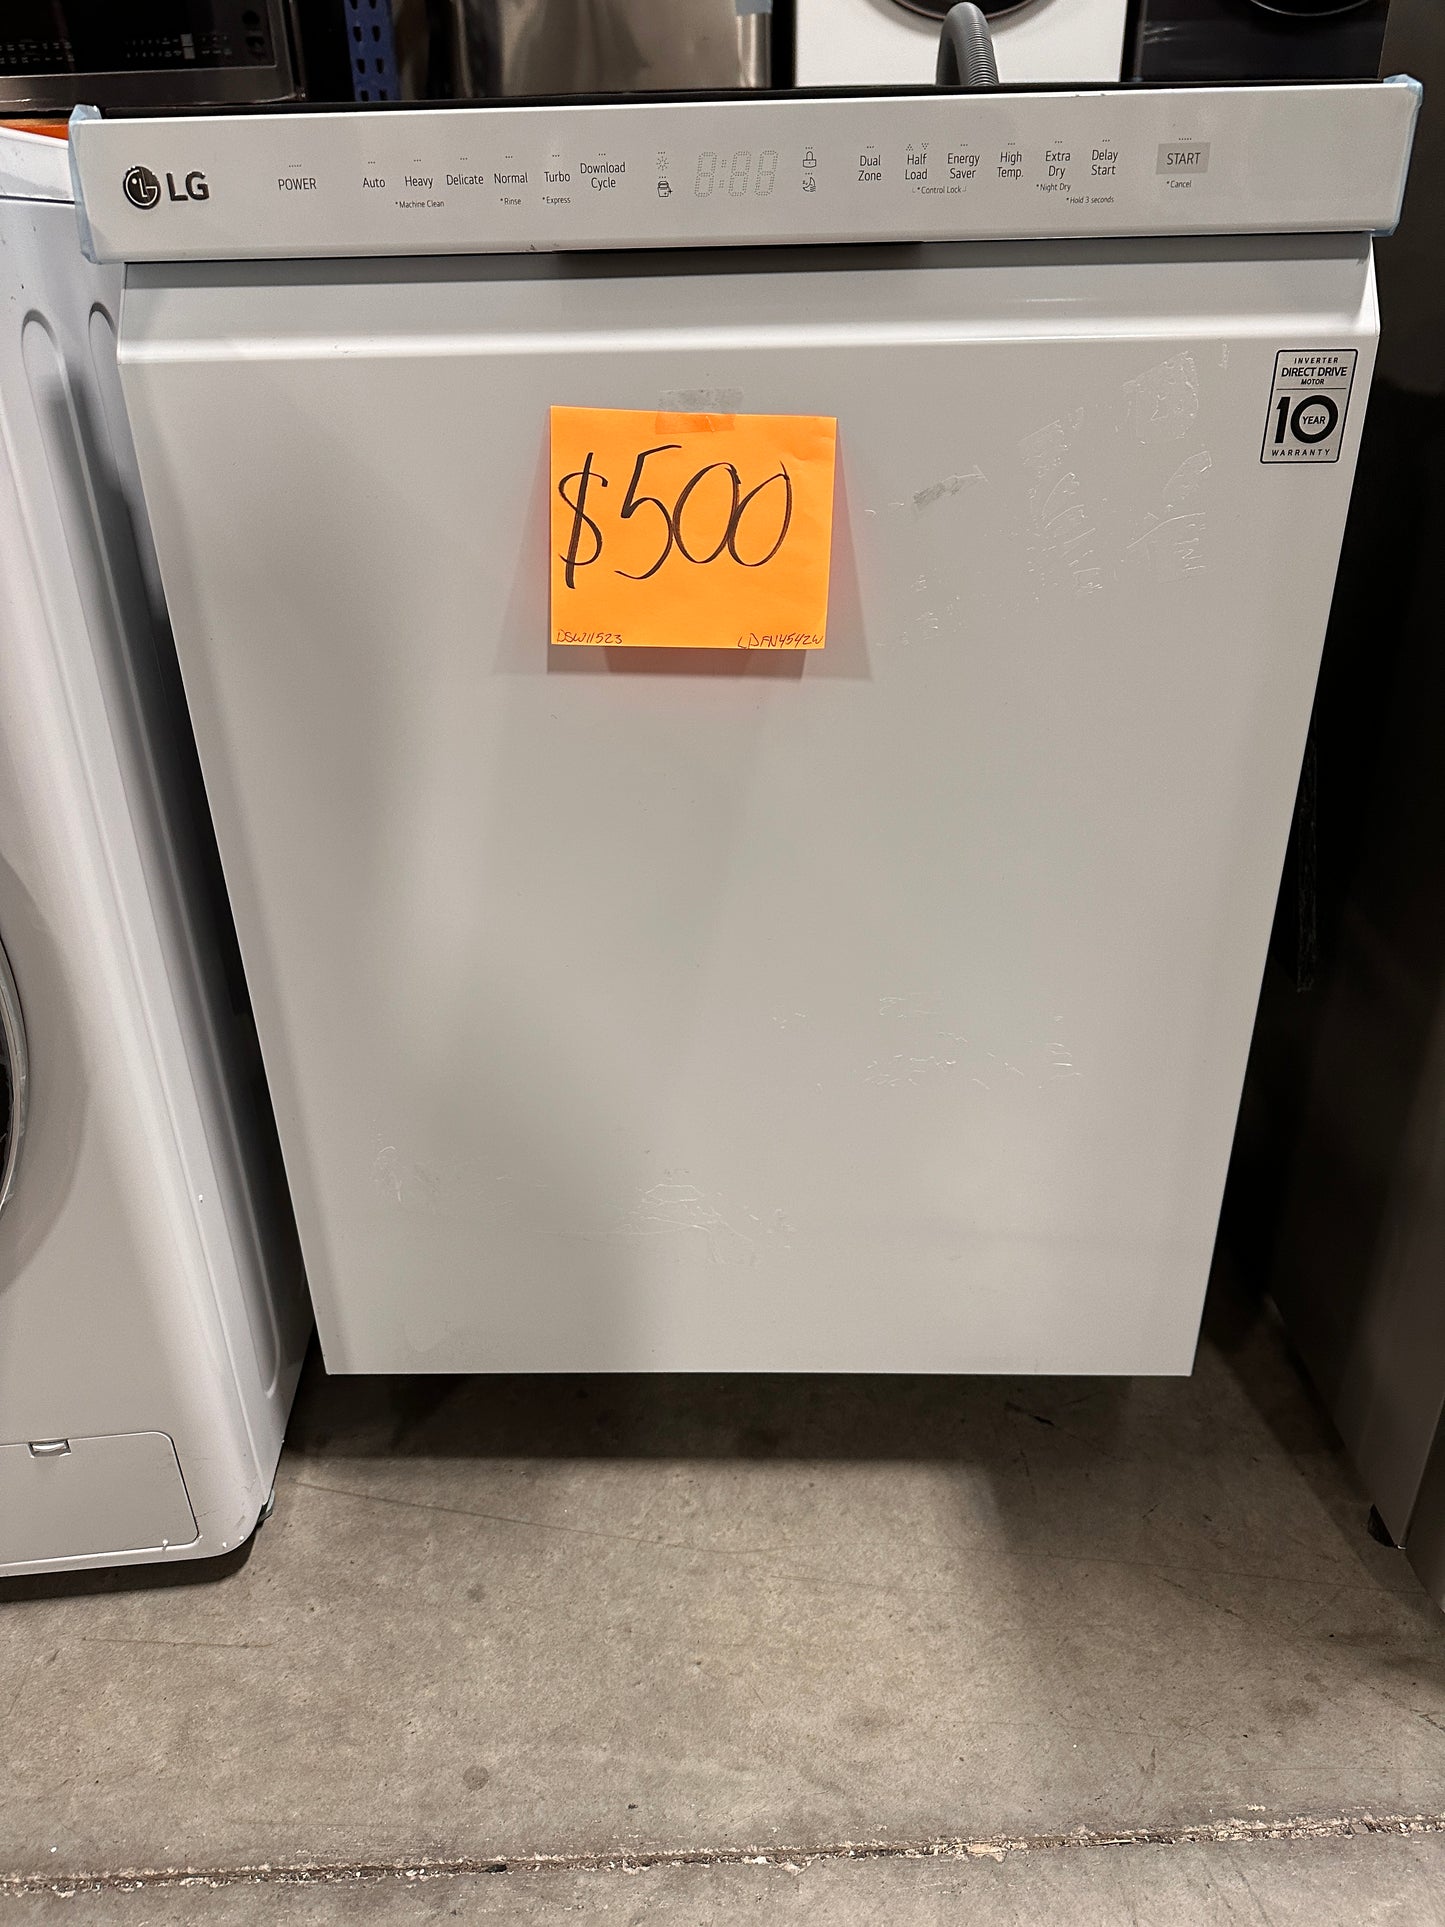 NEW SMART LG DISHWASHER WITH STAINLESS STEEL TUB - DSW11523